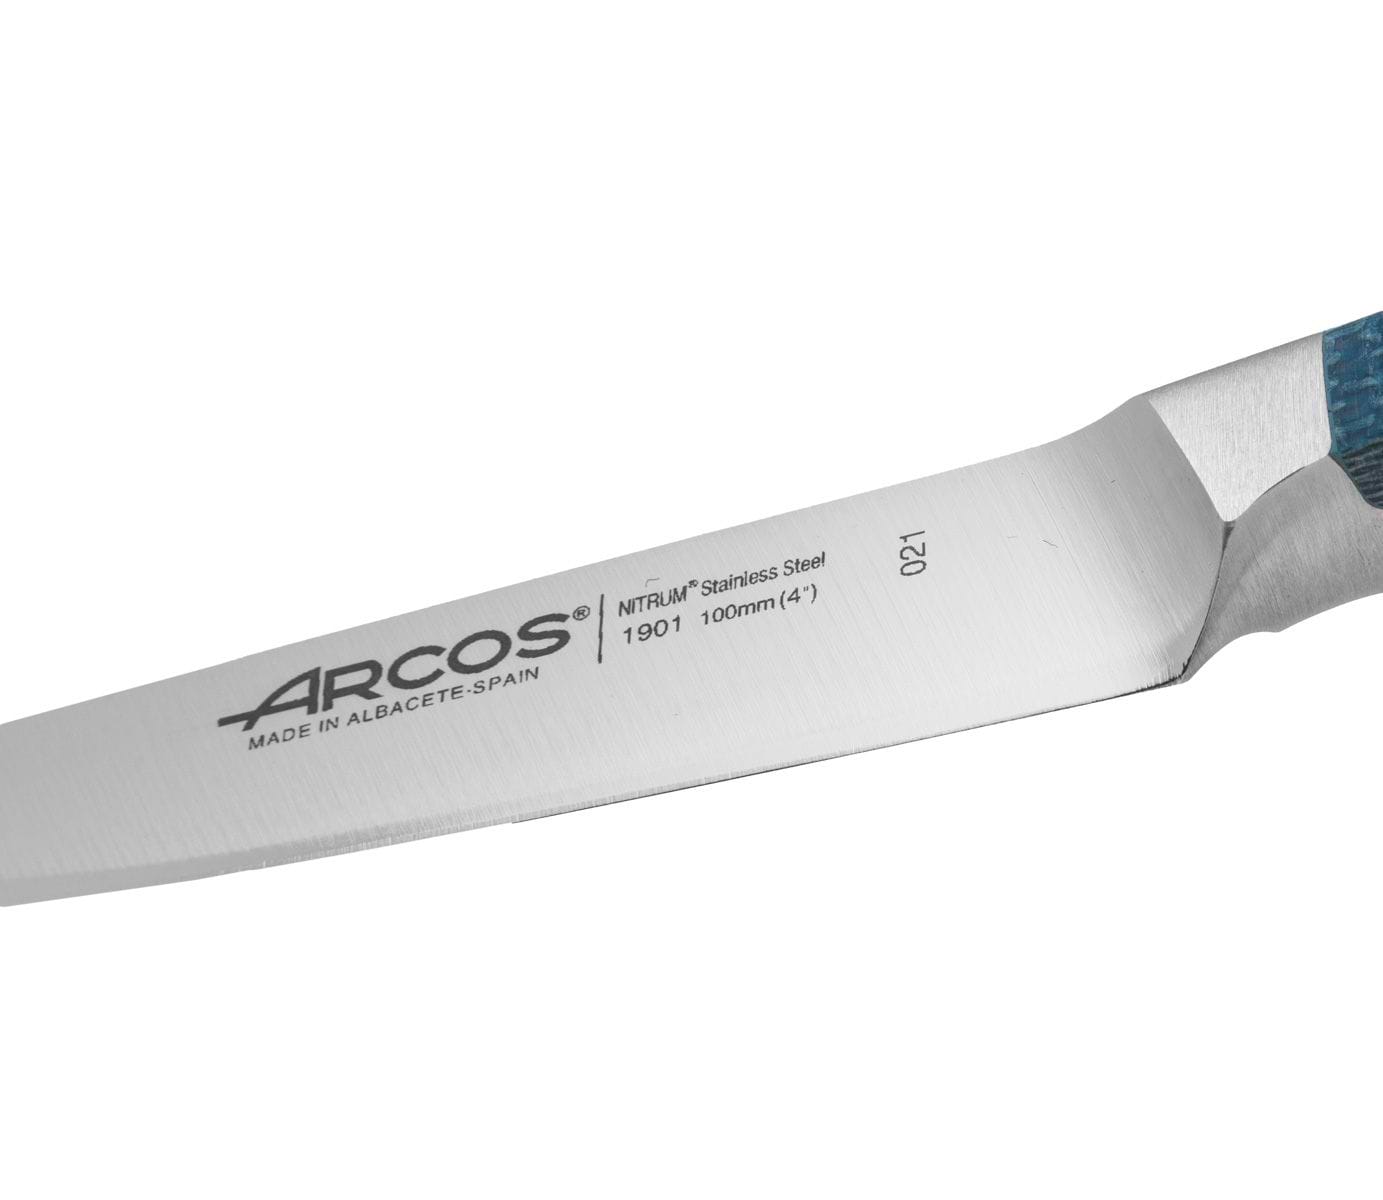 NKD Arcos pairing knife : r/chefknives